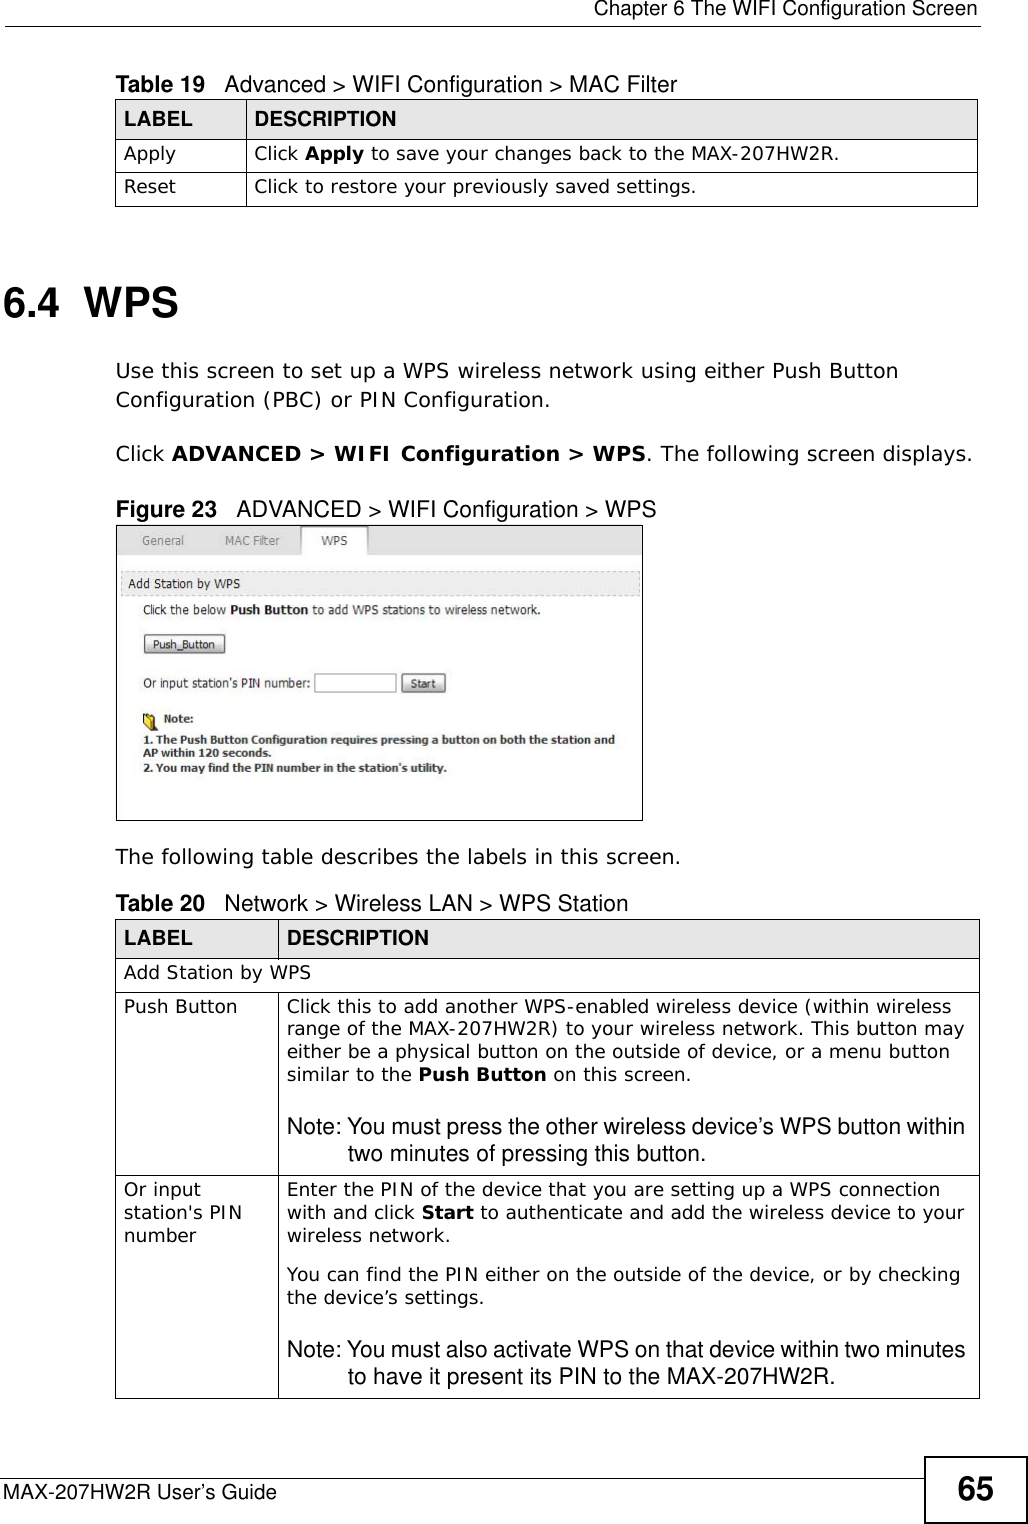  Chapter 6 The WIFI Configuration ScreenMAX-207HW2R User’s Guide 656.4  WPSUse this screen to set up a WPS wireless network using either Push Button Configuration (PBC) or PIN Configuration.Click ADVANCED &gt; WIFI Configuration &gt; WPS. The following screen displays.Figure 23   ADVANCED &gt; WIFI Configuration &gt; WPSThe following table describes the labels in this screen.Apply Click Apply to save your changes back to the MAX-207HW2R.Reset  Click to restore your previously saved settings.Table 19   Advanced &gt; WIFI Configuration &gt; MAC FilterLABEL DESCRIPTIONTable 20   Network &gt; Wireless LAN &gt; WPS StationLABEL DESCRIPTIONAdd Station by WPSPush Button Click this to add another WPS-enabled wireless device (within wireless range of the MAX-207HW2R) to your wireless network. This button may either be a physical button on the outside of device, or a menu button similar to the Push Button on this screen.Note: You must press the other wireless device’s WPS button within two minutes of pressing this button.Or input station&apos;s PIN numberEnter the PIN of the device that you are setting up a WPS connection with and click Start to authenticate and add the wireless device to your wireless network.You can find the PIN either on the outside of the device, or by checking the device’s settings.Note: You must also activate WPS on that device within two minutes to have it present its PIN to the MAX-207HW2R.